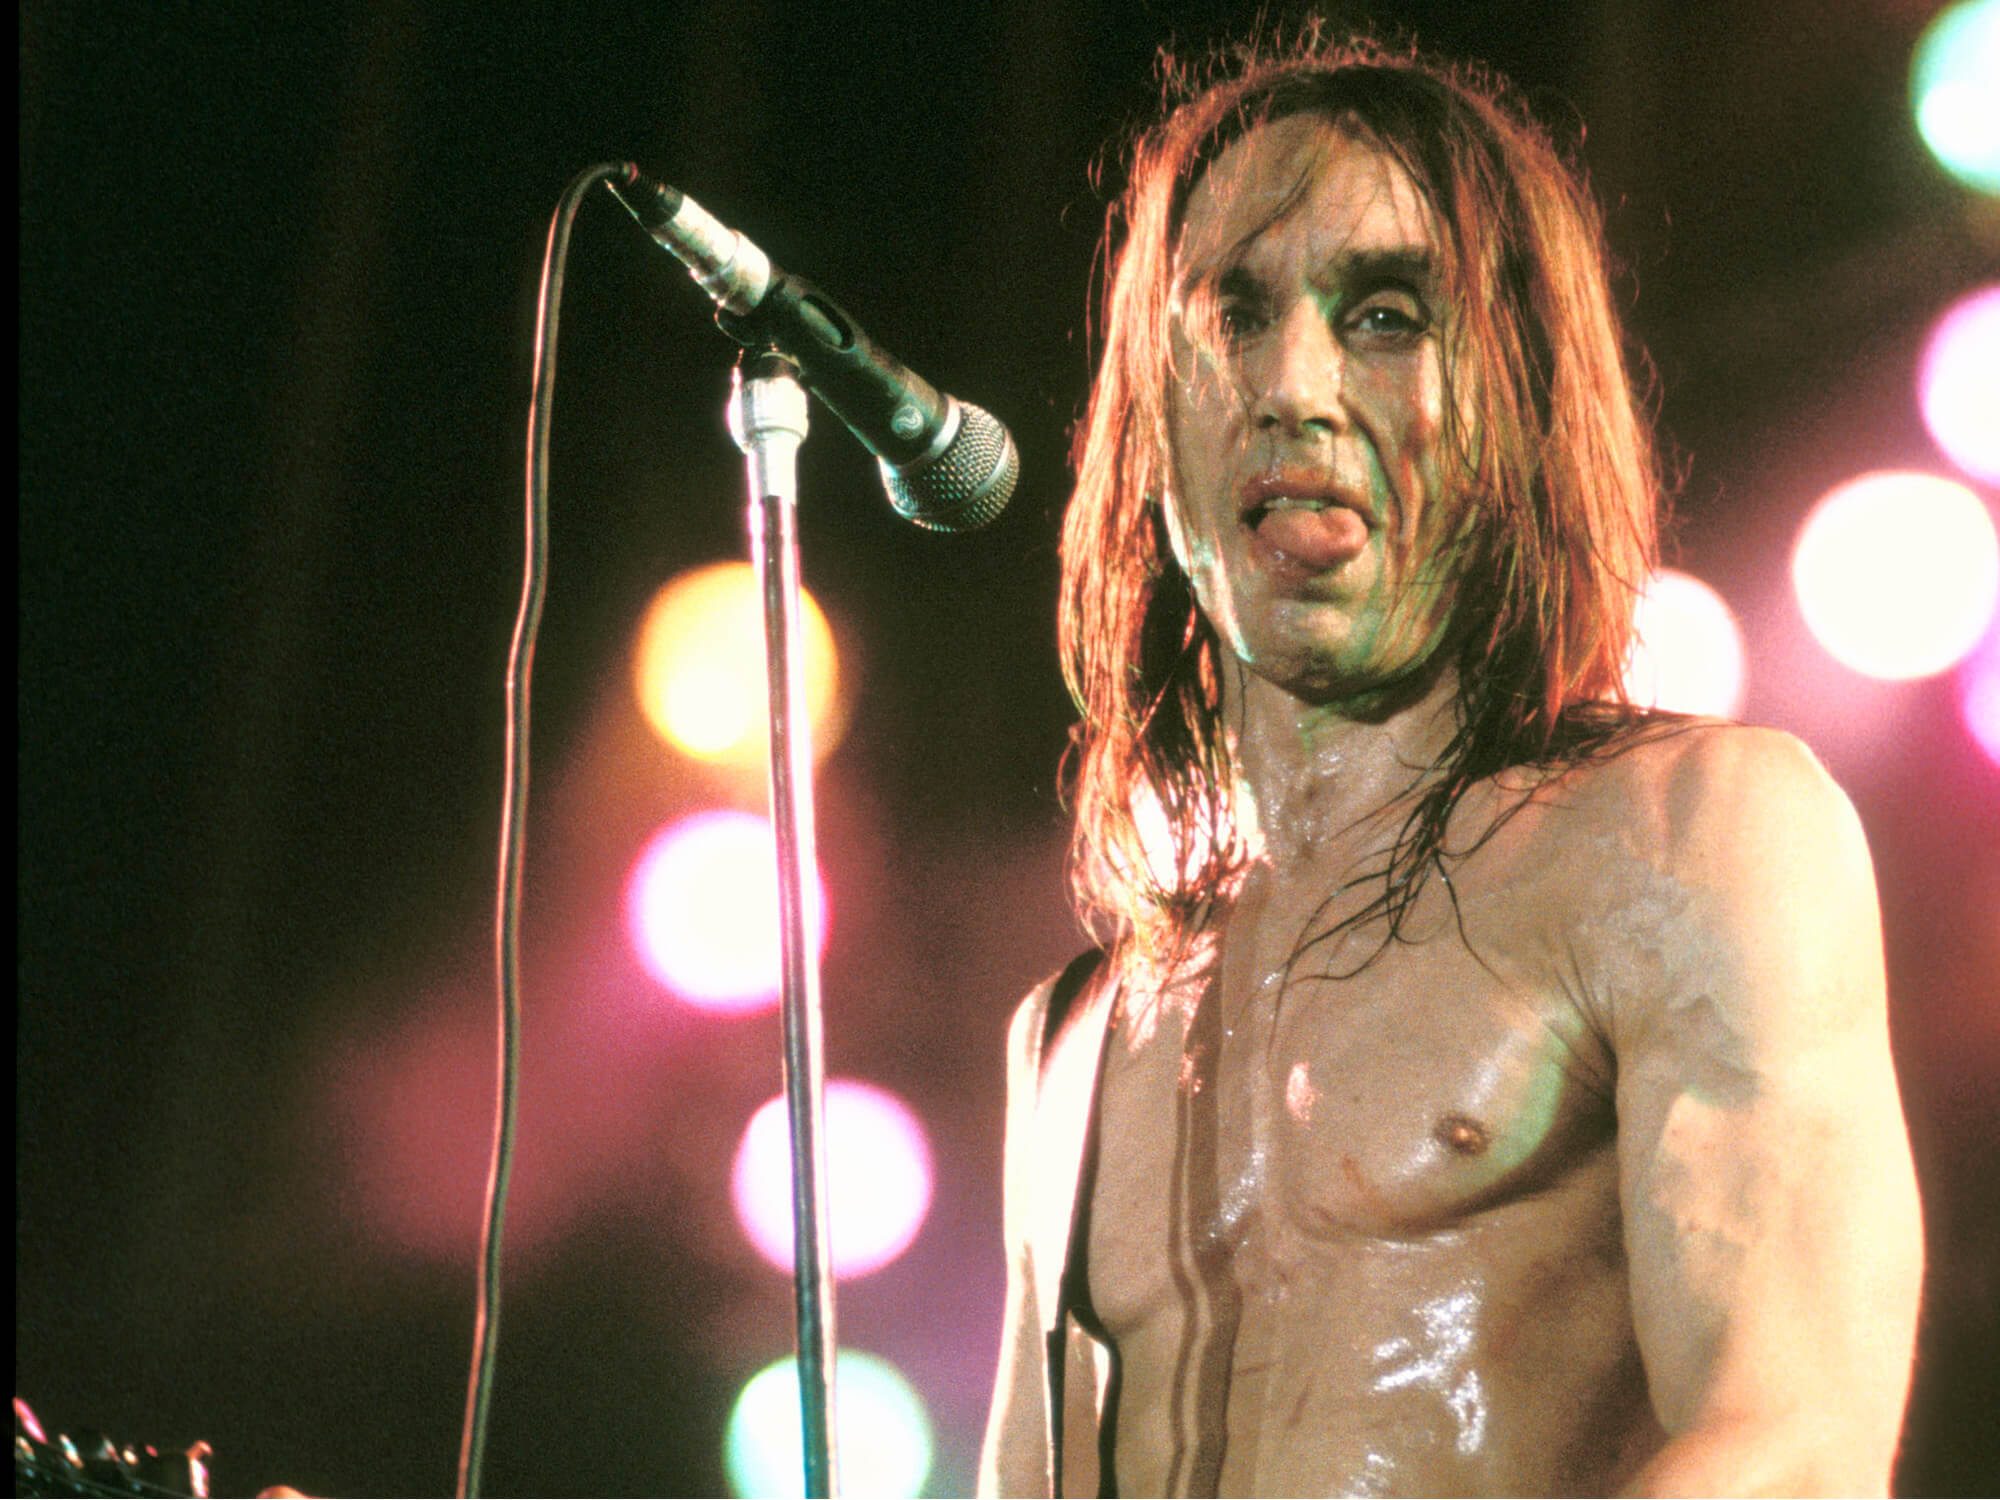 Iggy Pop performs live on stage at Lowlands Festival in Biddinghuizen, Netherlands on 29th August 1993